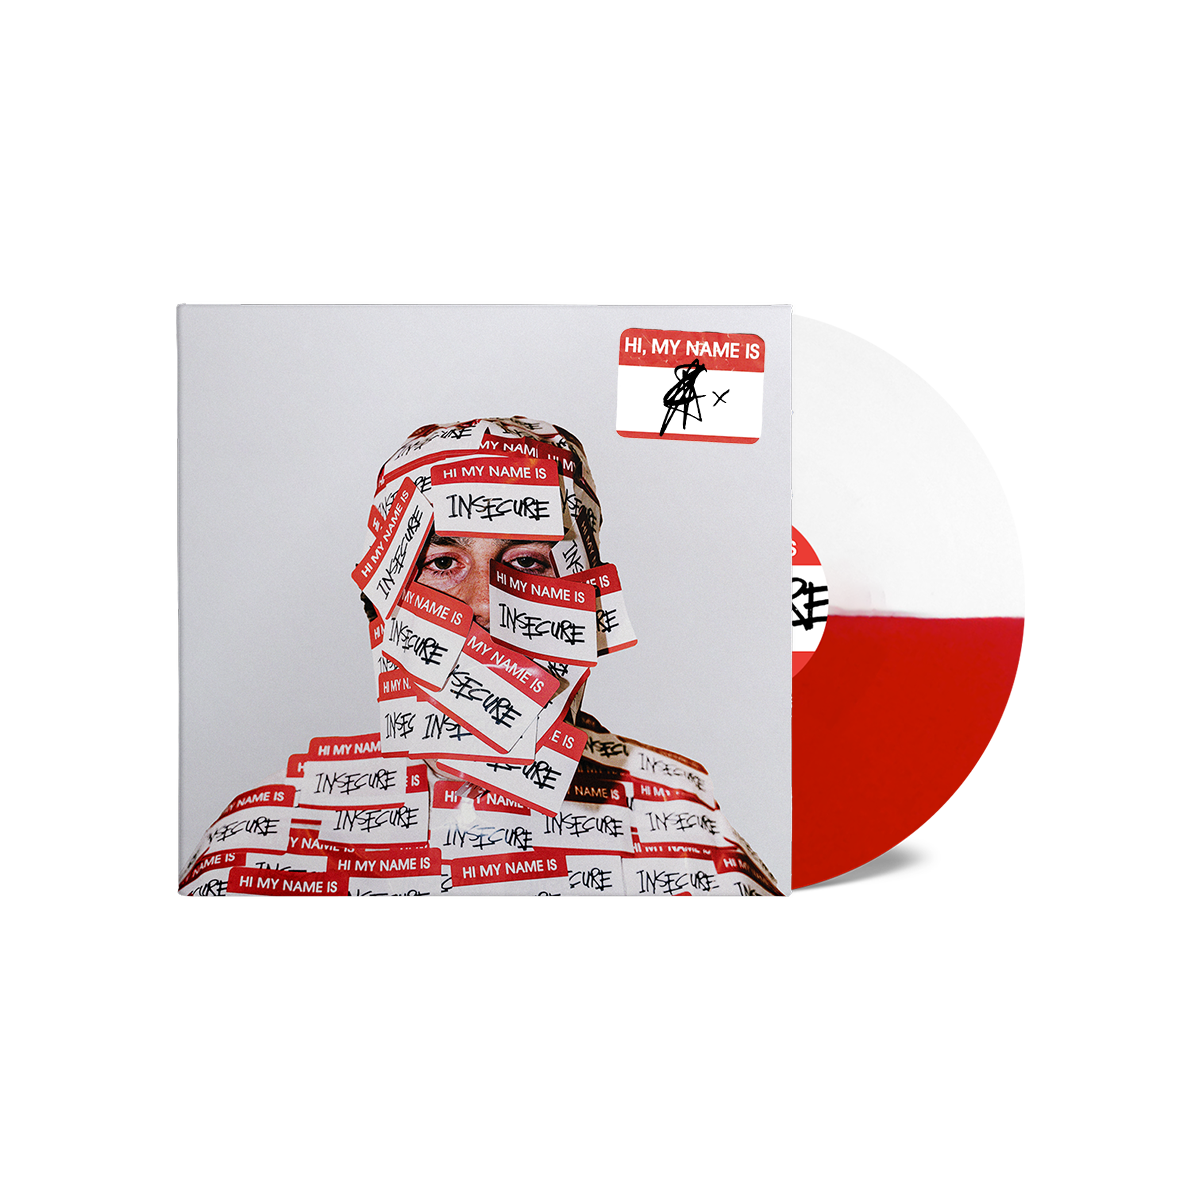 hi, my name is insecure signed alternative sleeve - red/white vinyl